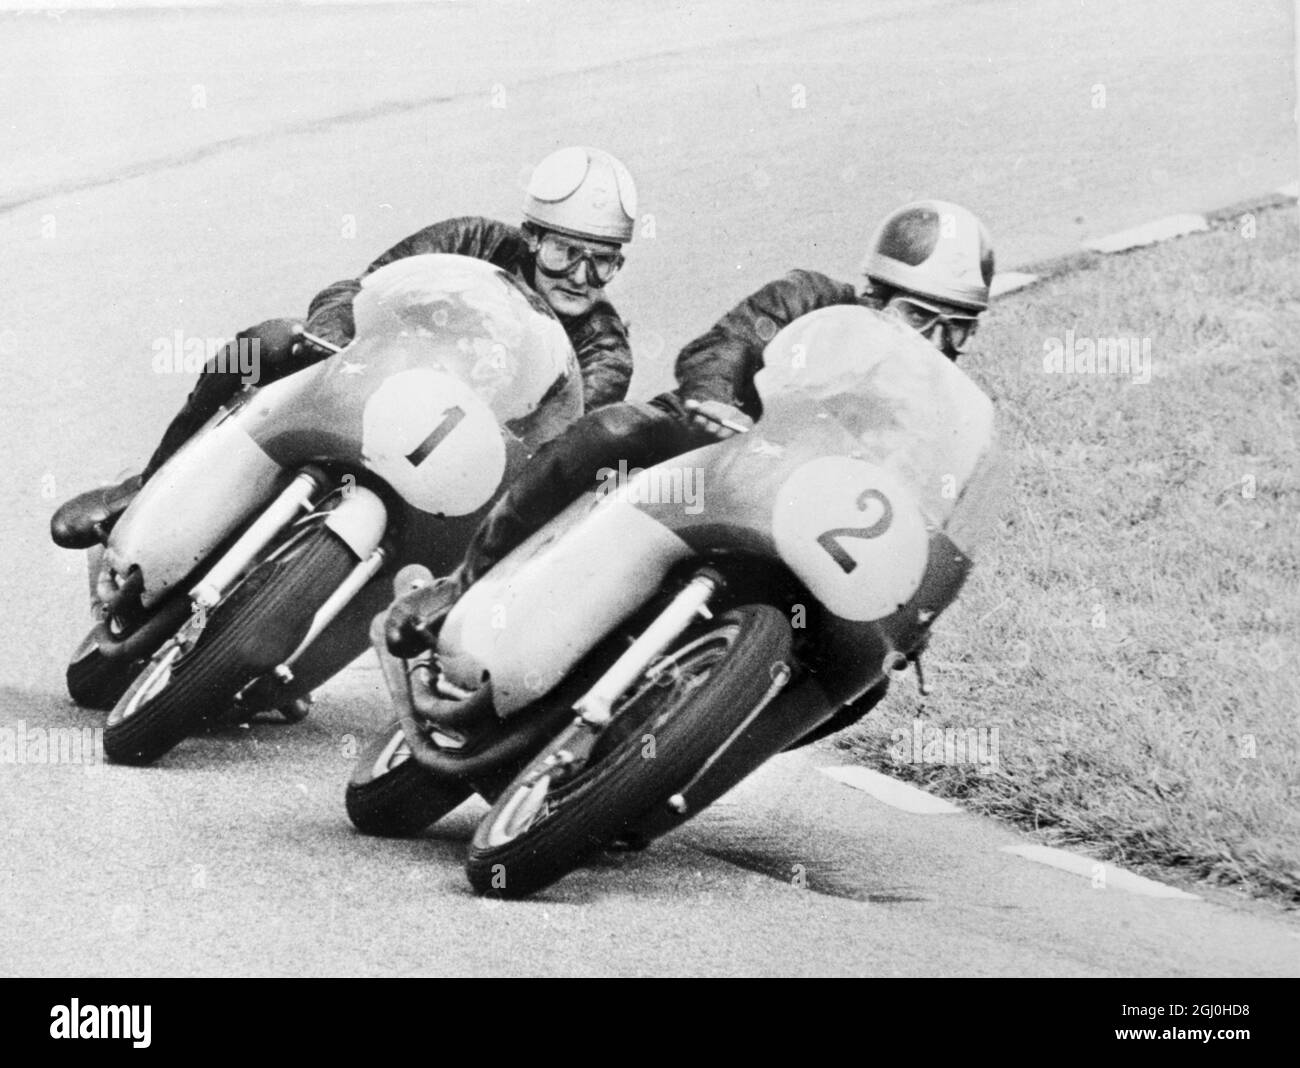 Assen, Holland: Britain Mike Hailwood (N0 . 1), worlds motor cycling champion, riding a four-cylinder Italian M.V., closely follows team mate Giacomo Agostini (N0.2) as they round a bend during Senior Dutch T.T. Race at Assen, June 26th, Hailwood, who won the recent Isle of Man Senior T.T., for the third successive year, set up a new record when he won the event after a great duel with Agostini. His time for the 96.6-mile race was duel with Agostini. His time for the 96.6-miles race was 64:59.6 seconds - An average of 88.4 M.P.H. 29 June 1965 Stock Photo